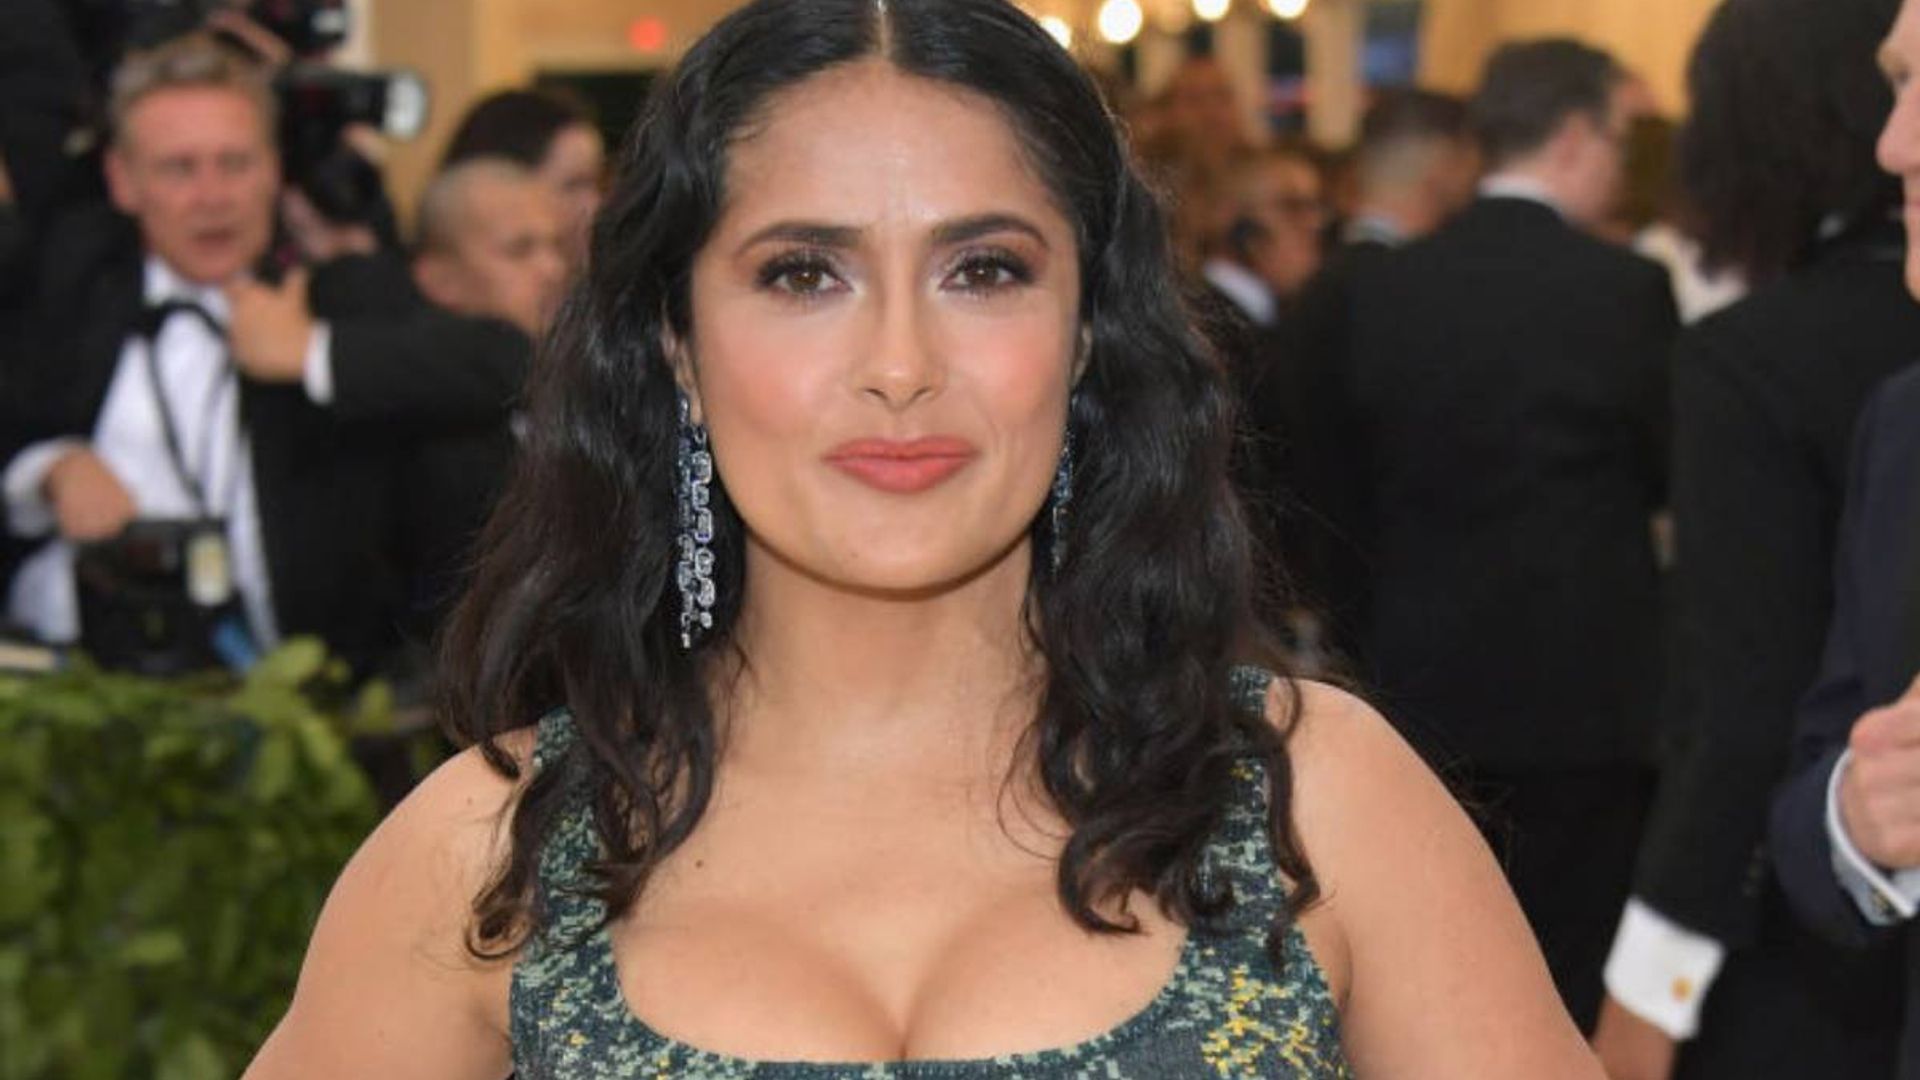 Salma Hayek's curves in hot-pink corset leave fans lost for words